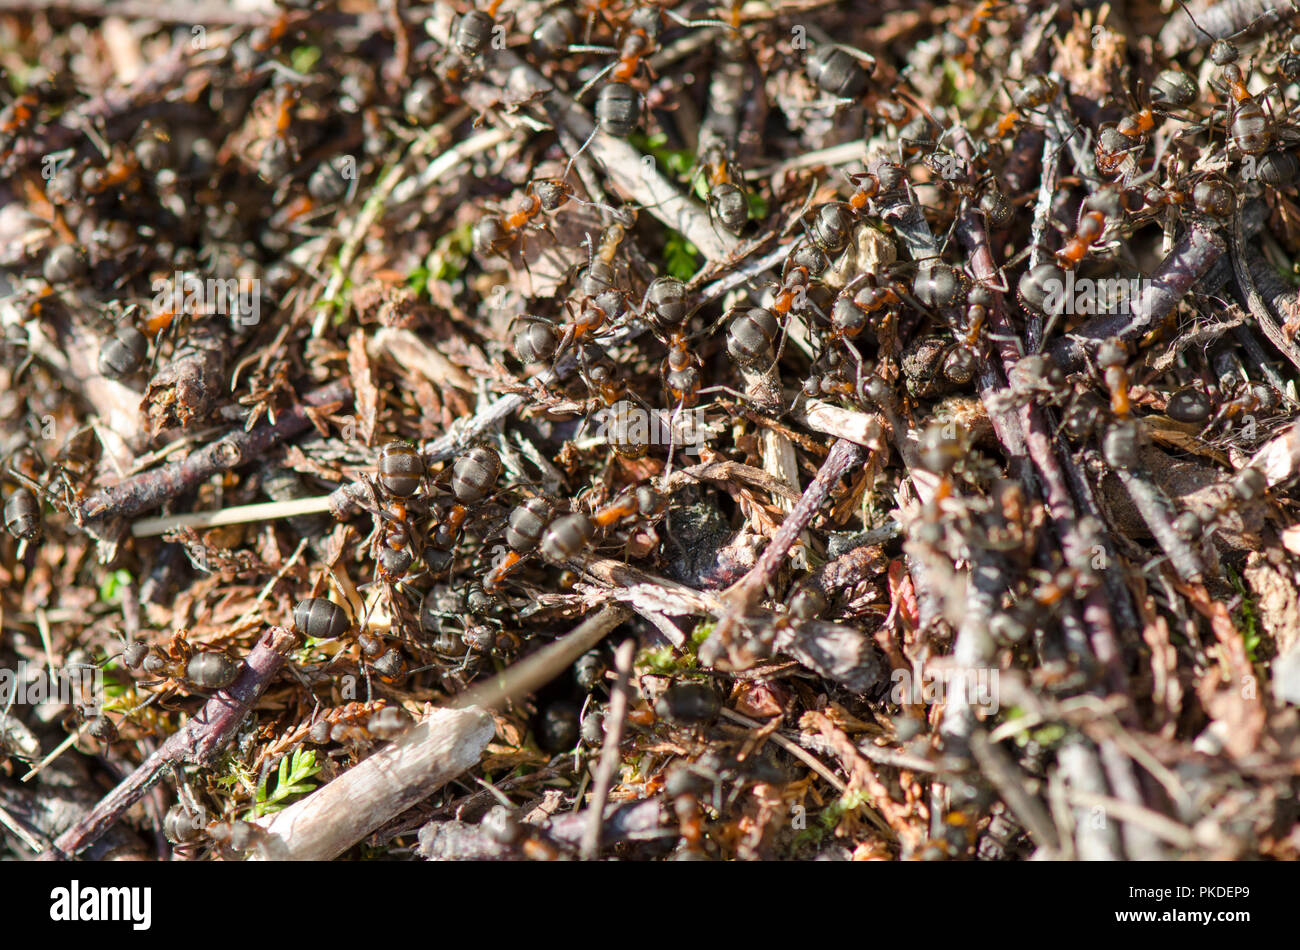 Ants in red ants nest. Netherlands. Stock Photo